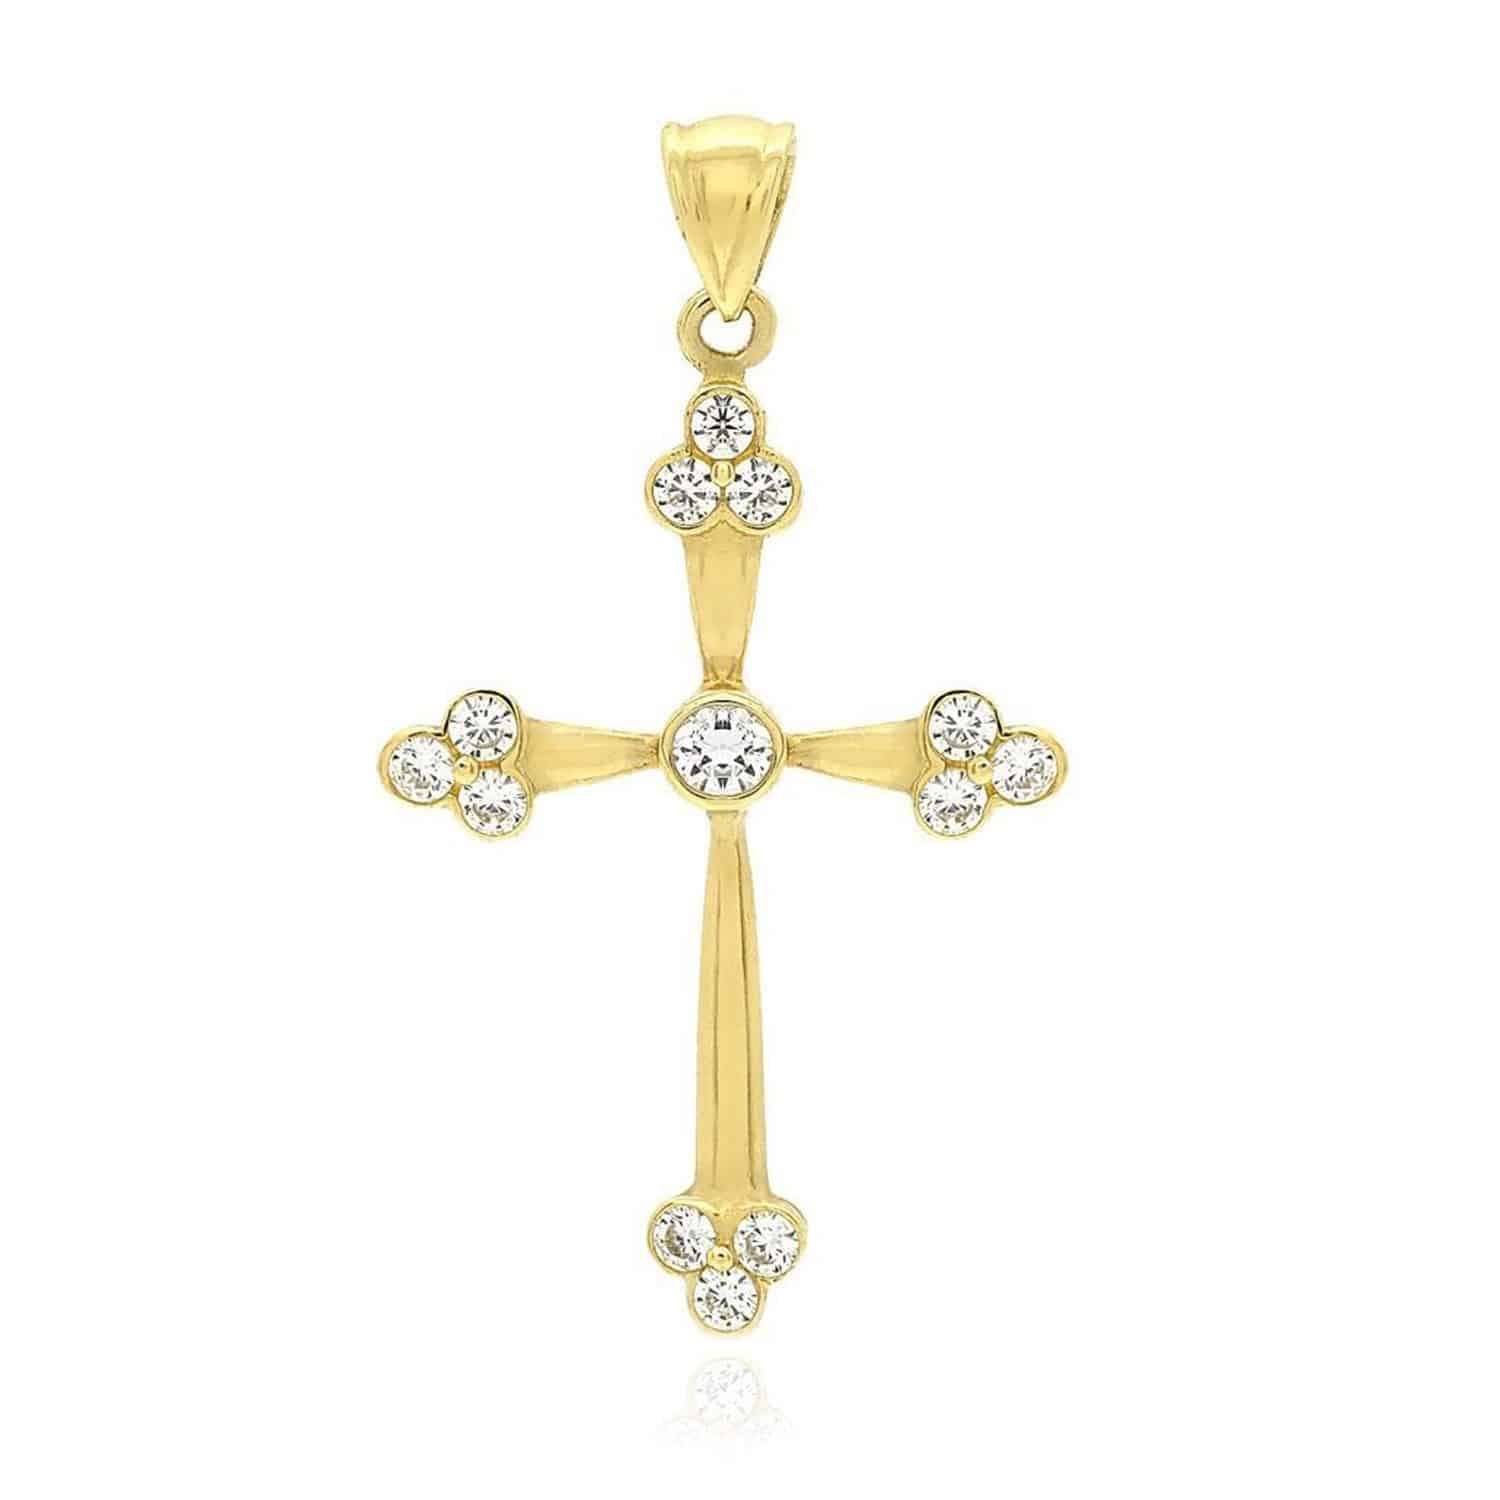 Solid 14k Yellow Gold 1CTW Simulated Diamond Religious Cross 1.42"